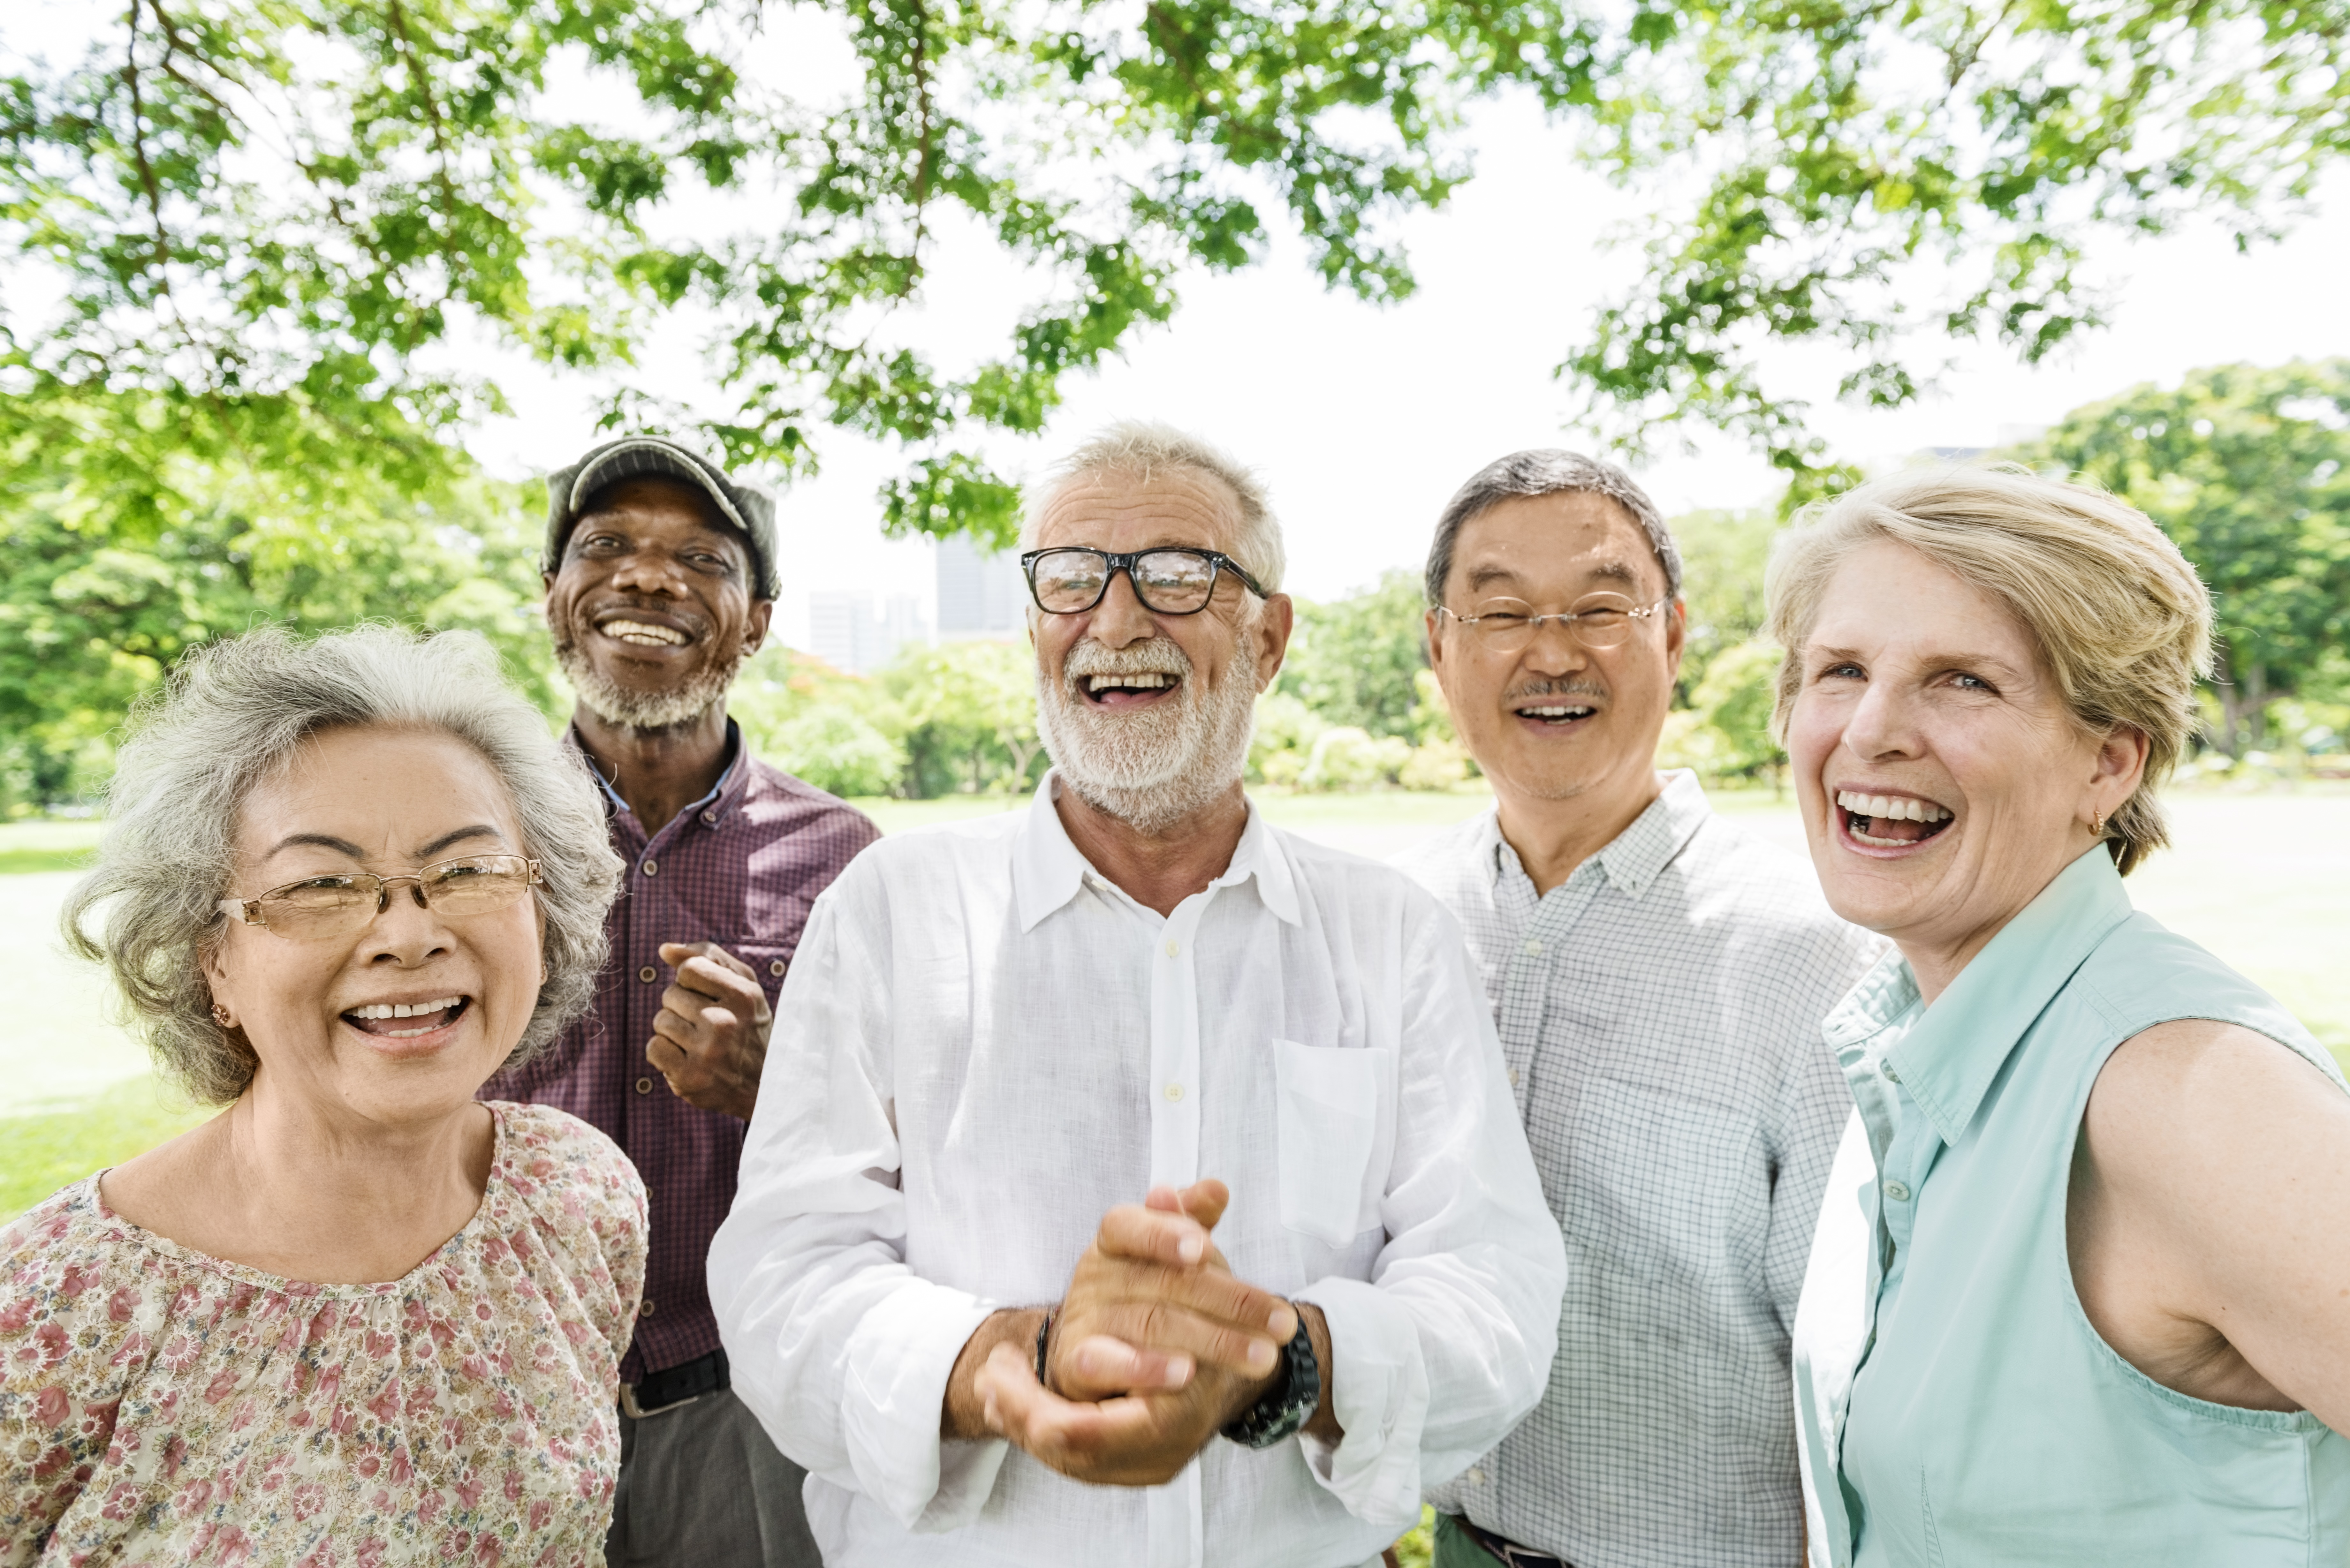 Group of aging adults laughing